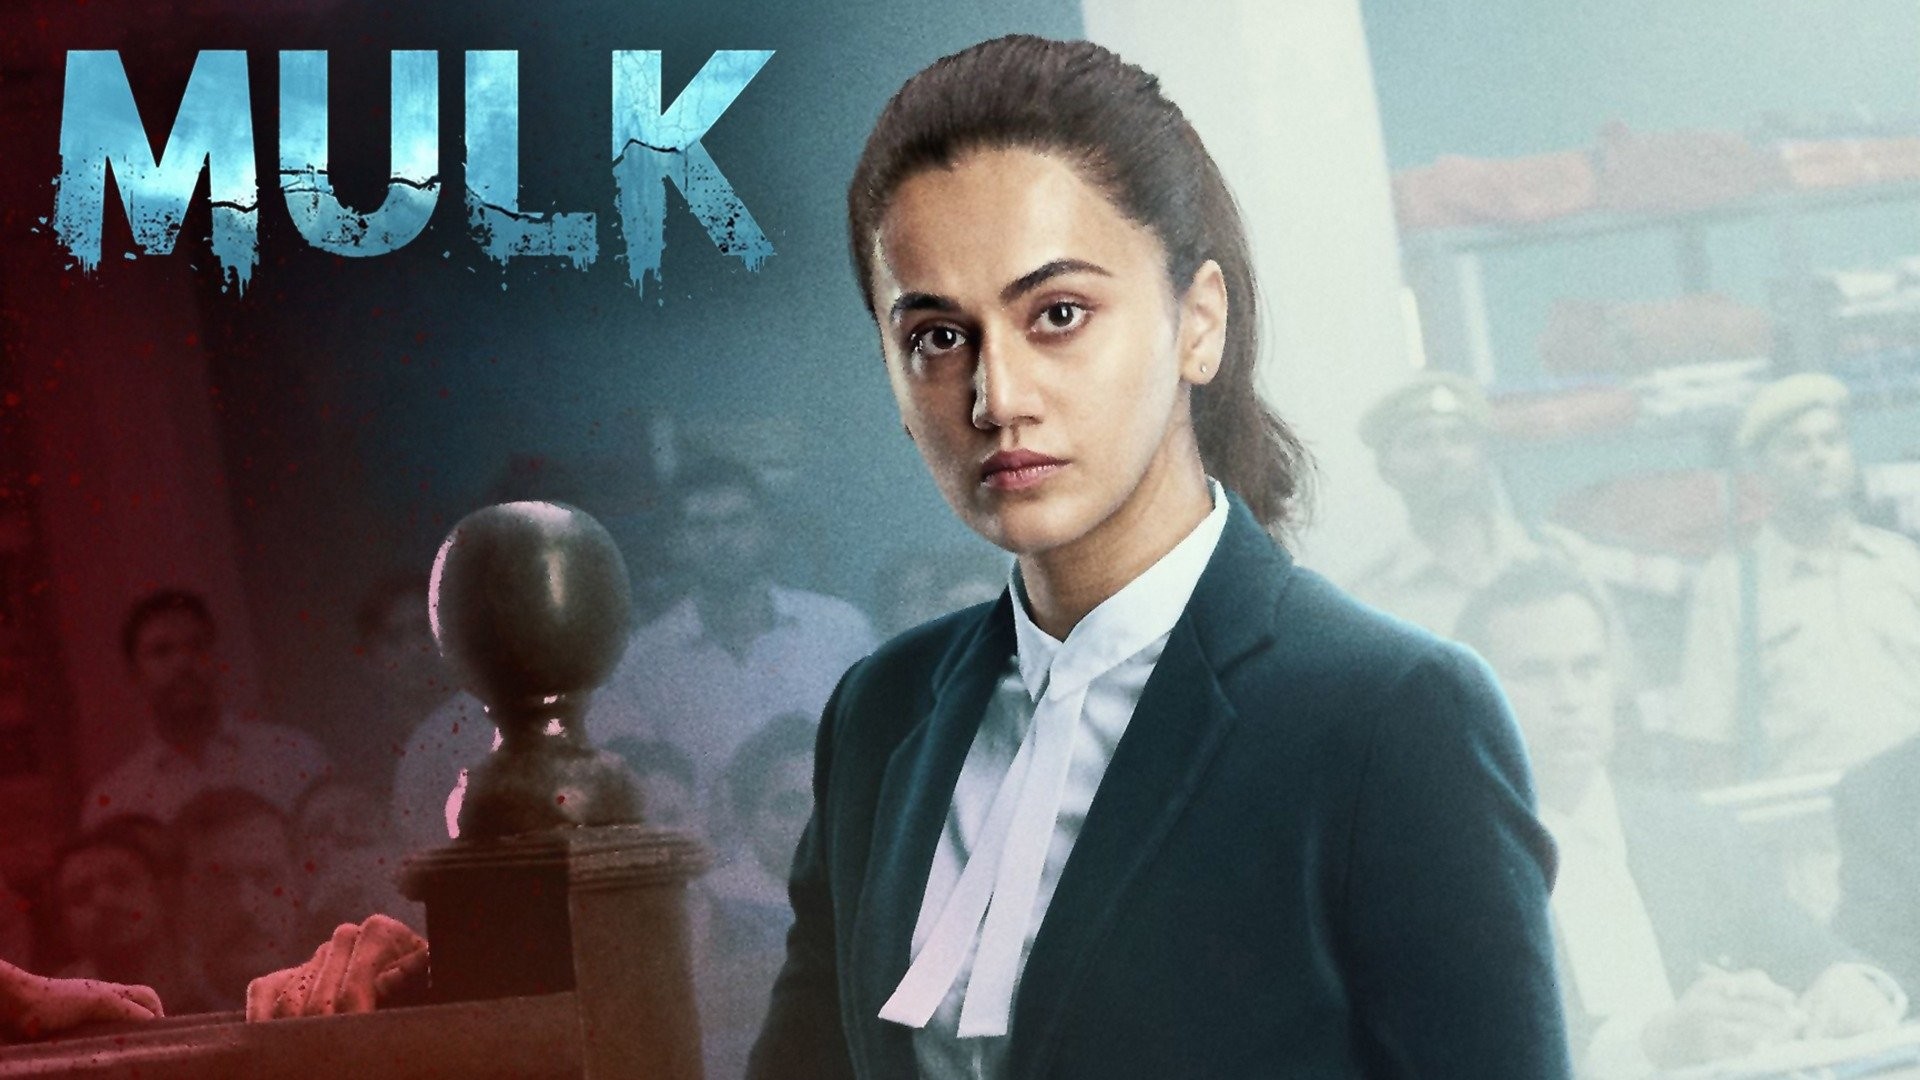 Mulk review: Rishi Kapoor and Taapsee Pannu make this courtroom drama worth  a watch